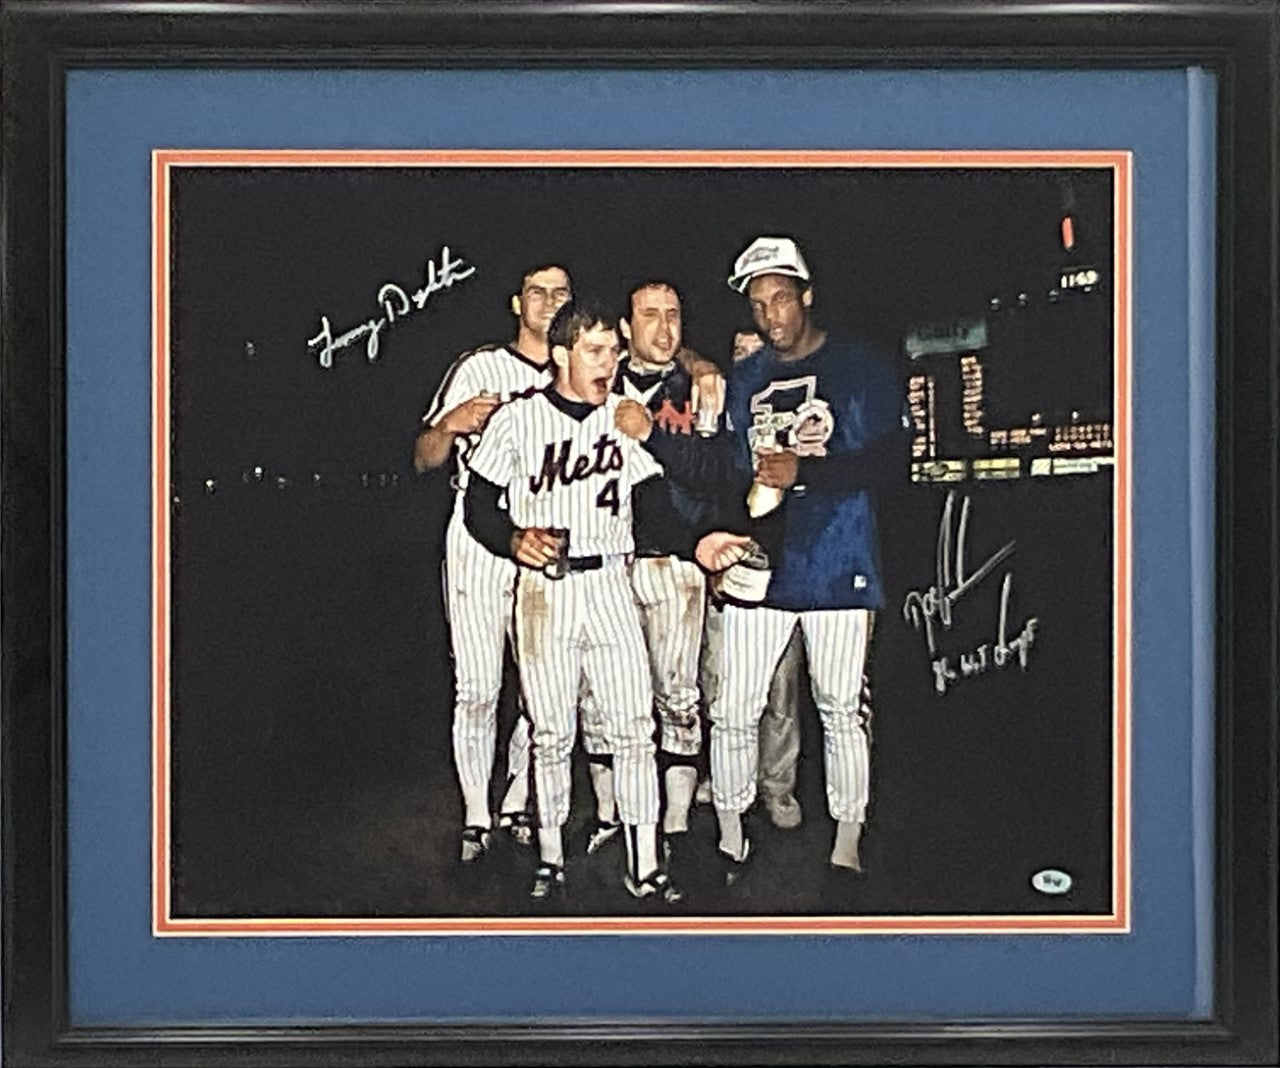 Dykstra & Gooden New York Mets Autographed 16x20 Photo Framed